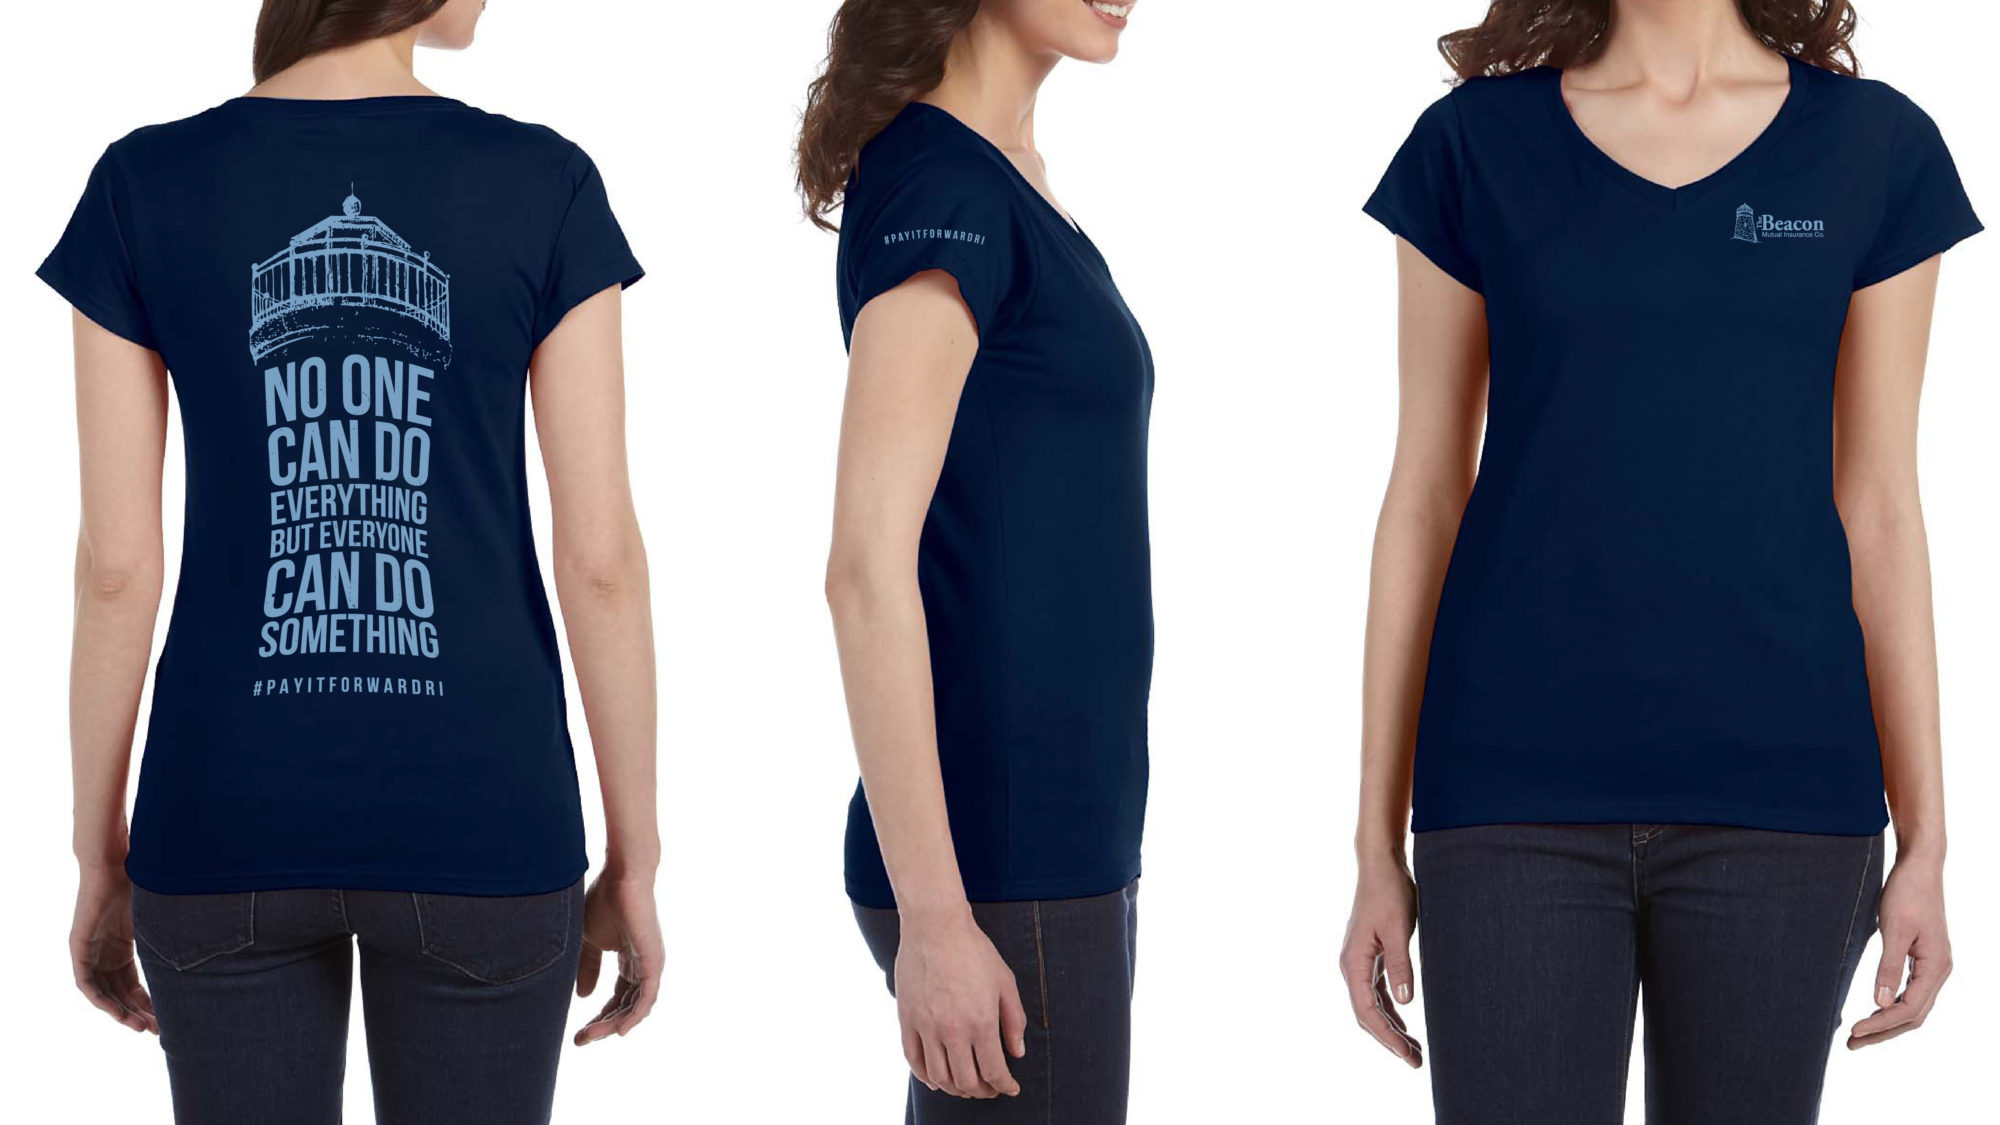 woman wearing Beacon Mutual navy t-shirt turned three different directions